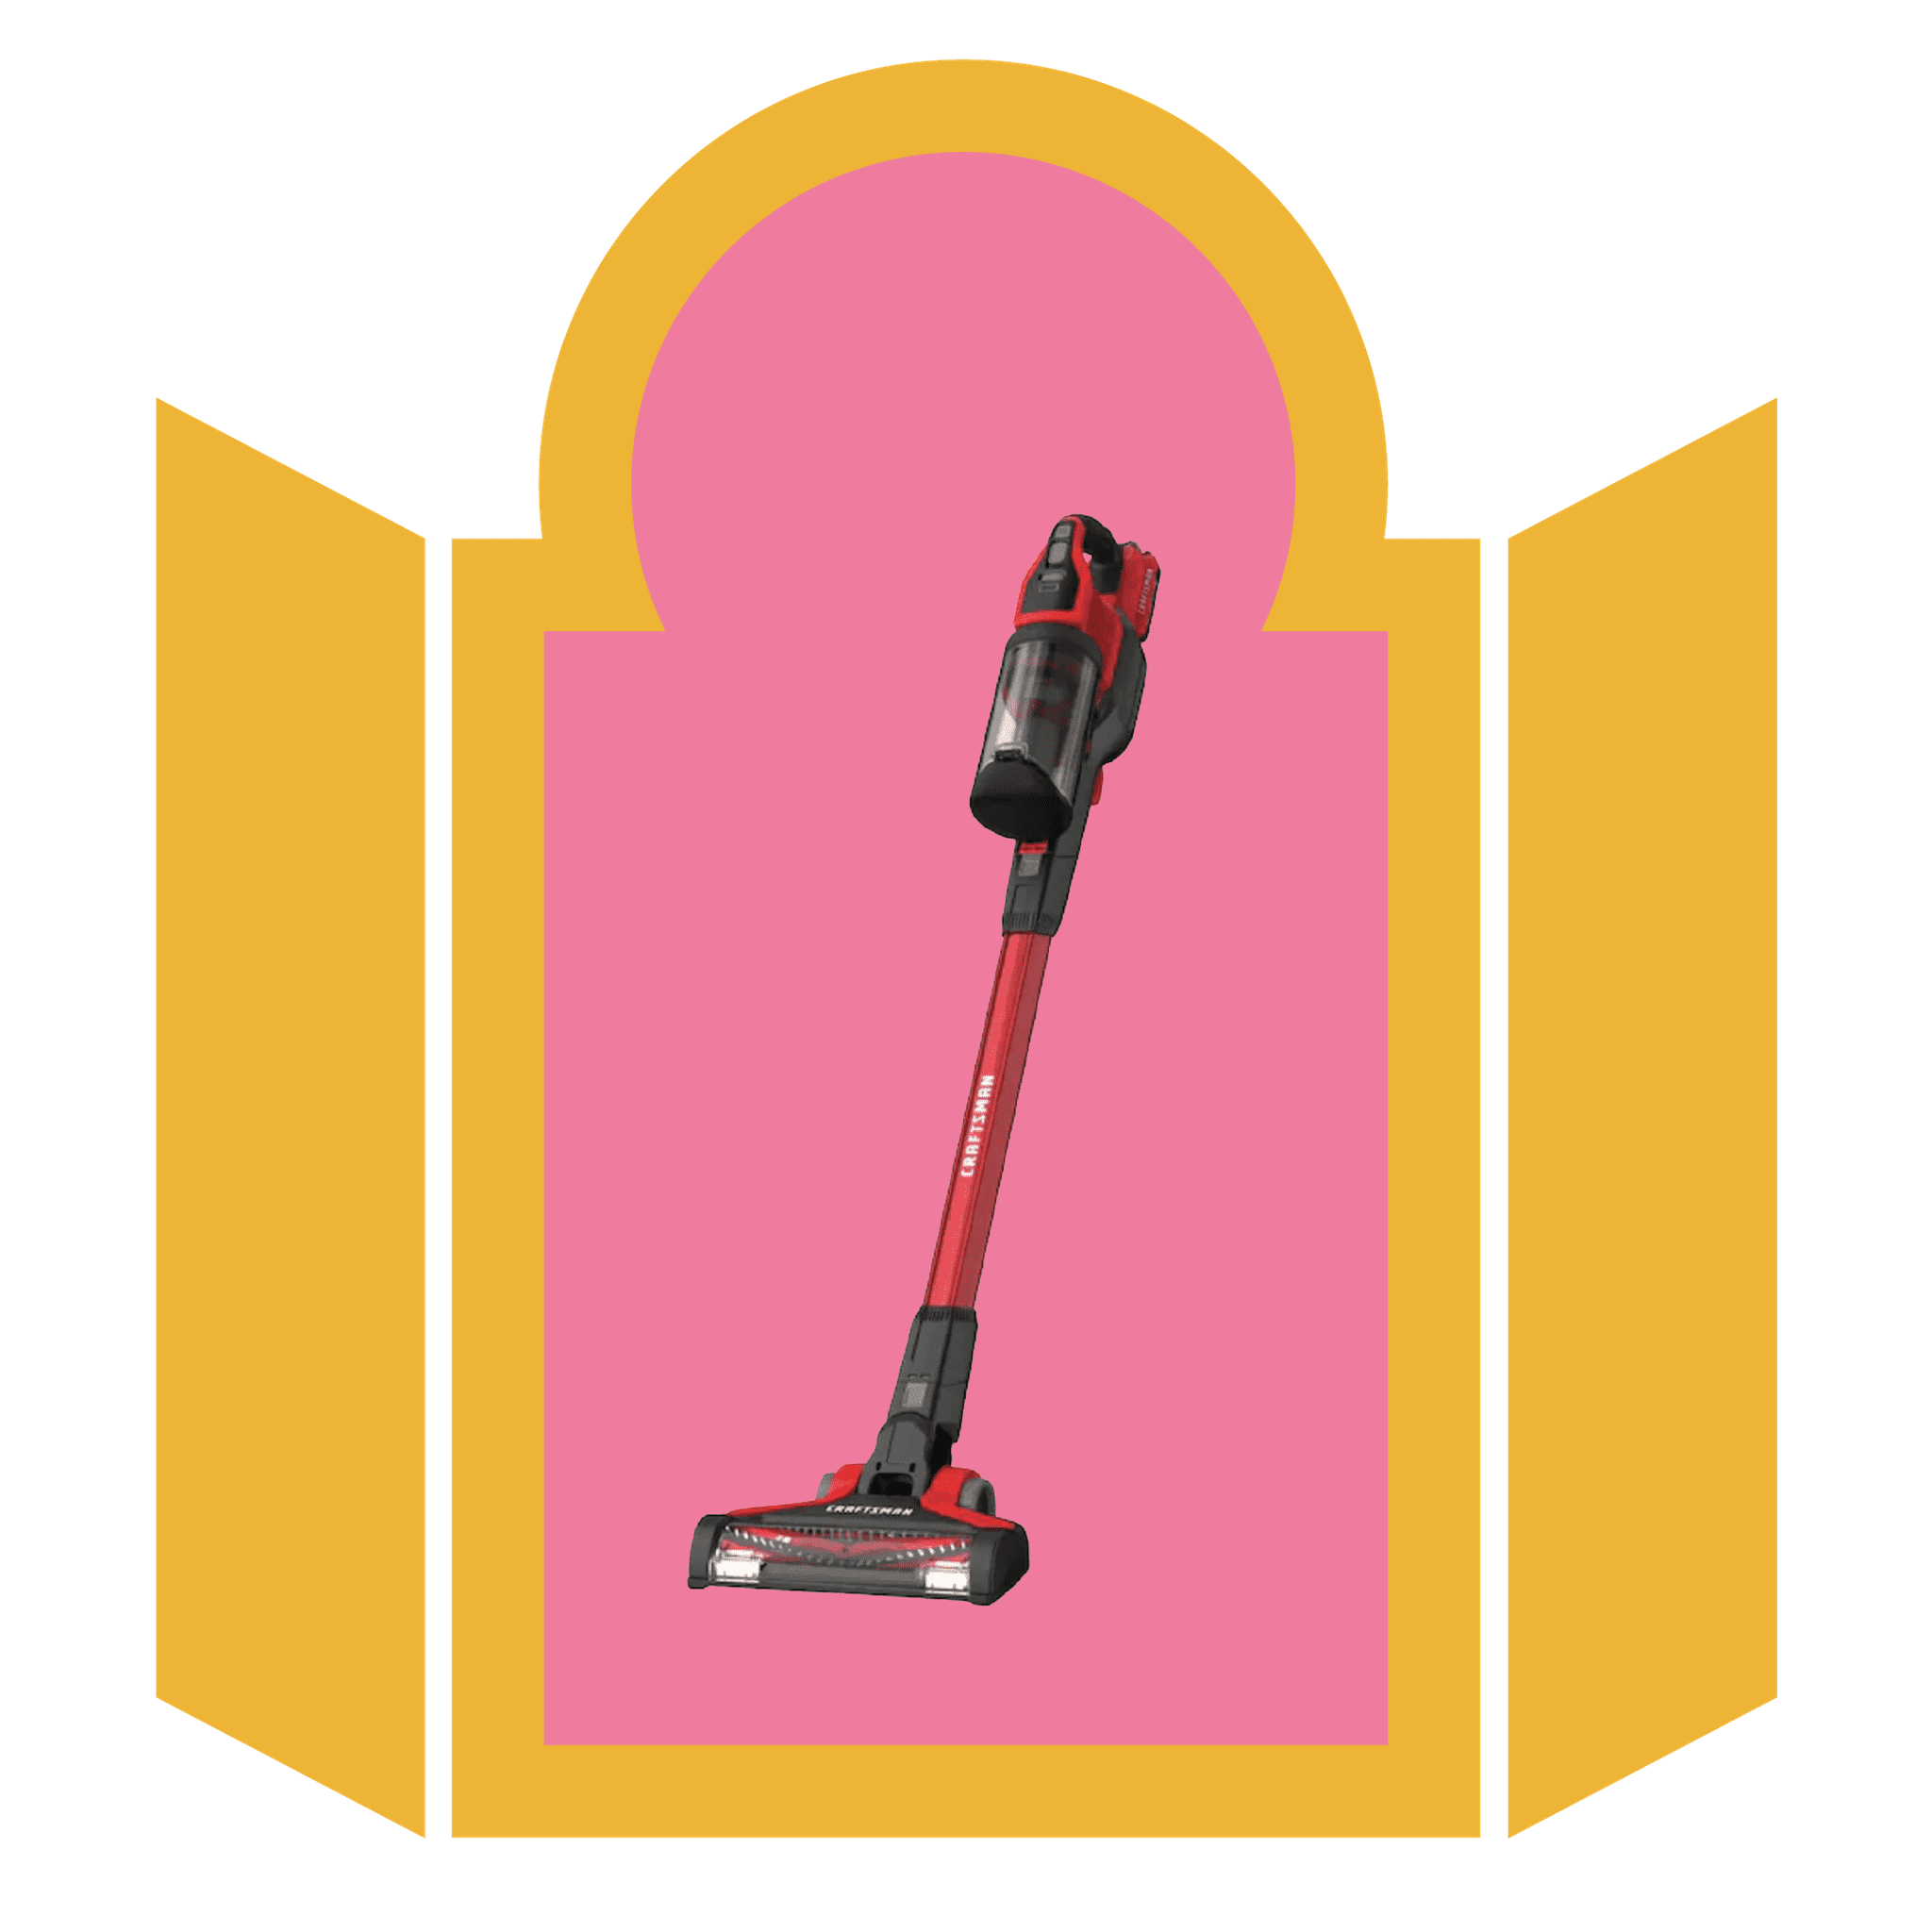 Big moves come with big messes, so help your friend stay ahead of the game with this Craftsman Cordless Stick Vacuum ($199.99). As part of the V20 system, the battery is removable and lasts up to one hour, meaning it can be incorporated seamlessly into their arsenal of home tools.